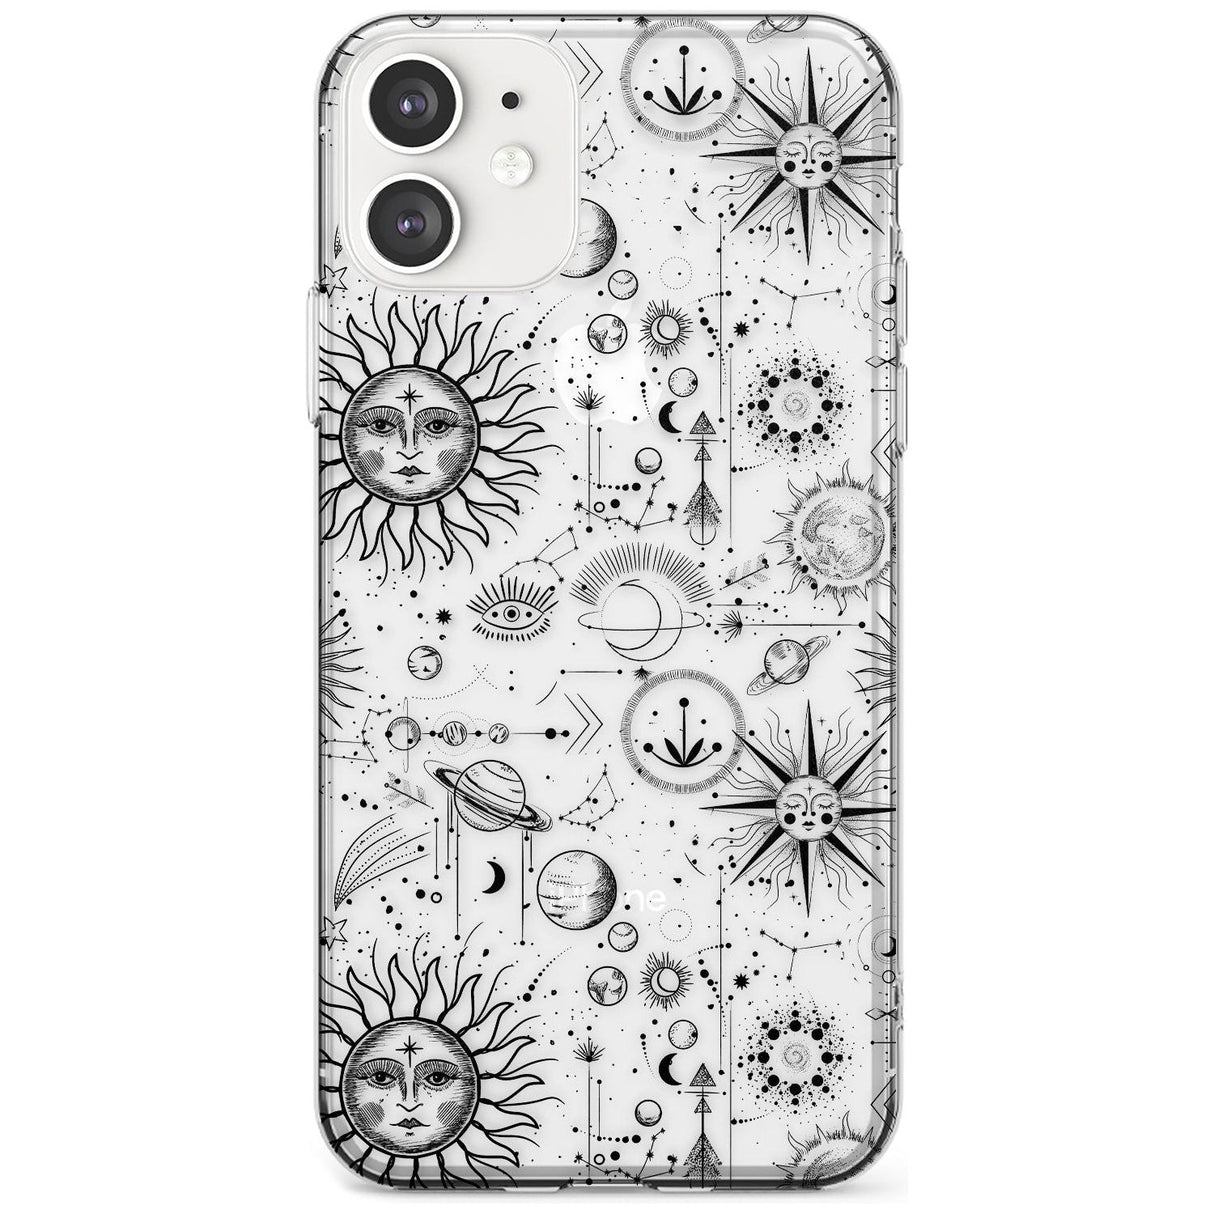 Suns & Planets Astrological Slim TPU Phone Case for iPhone 11